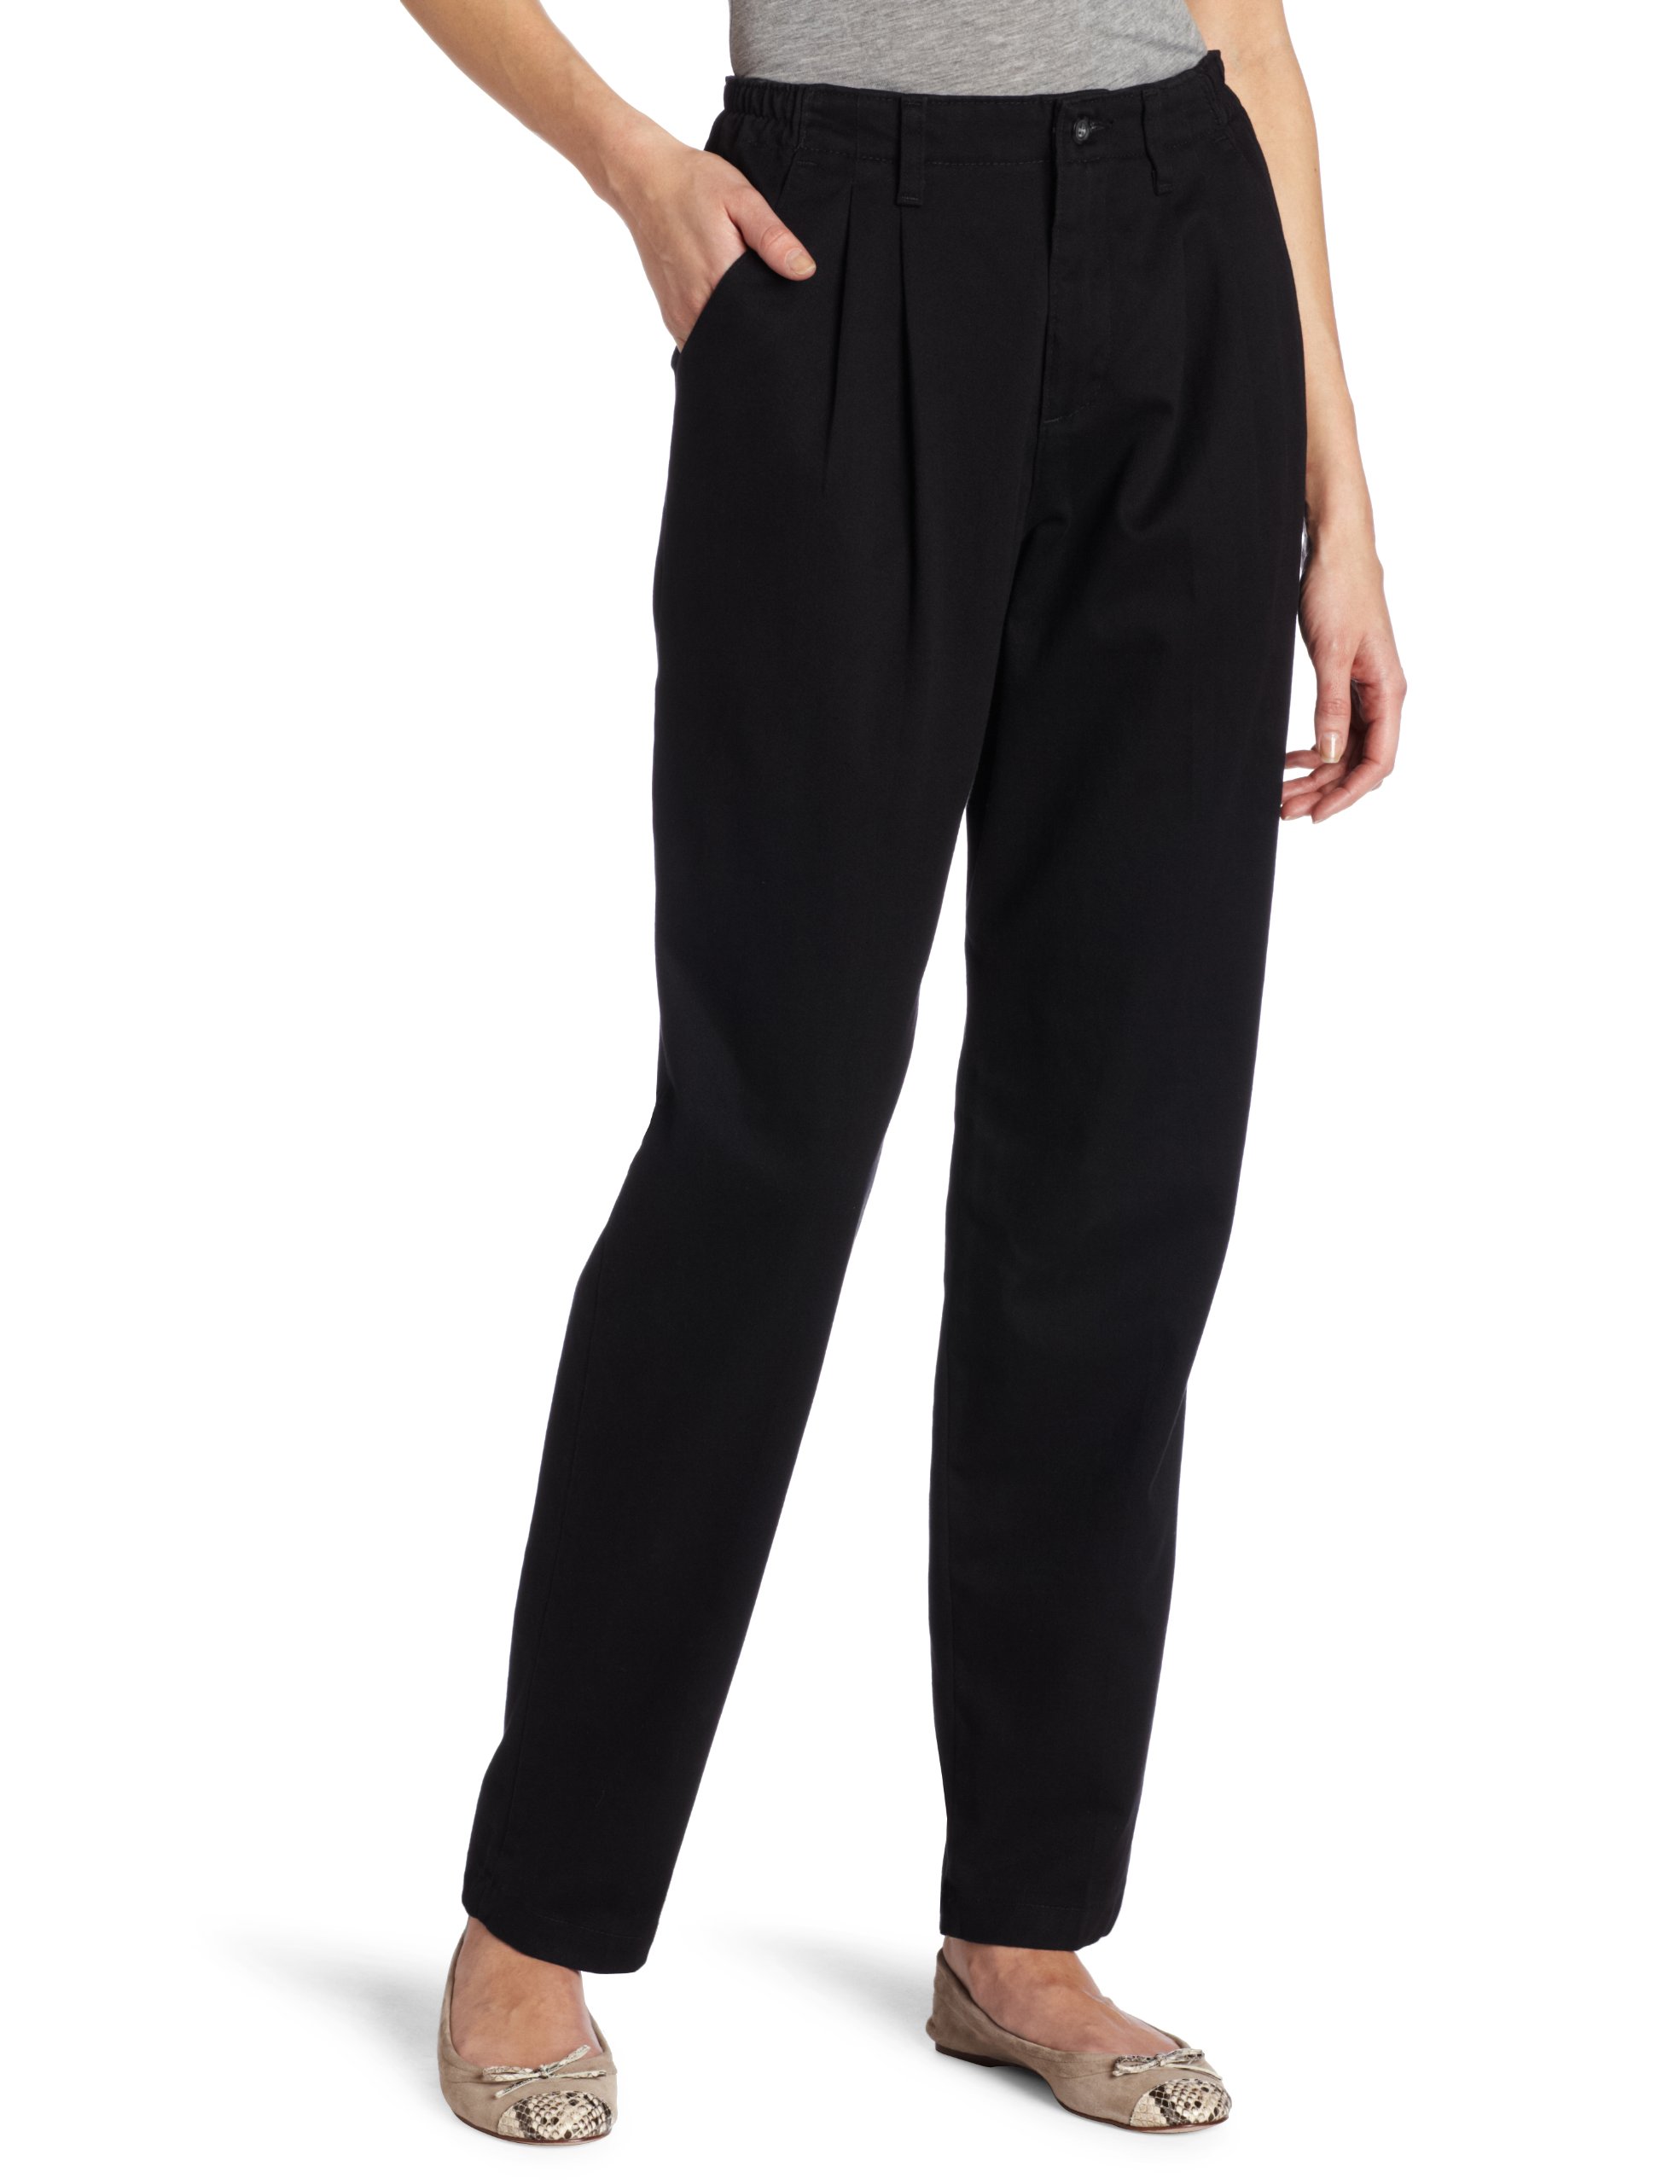 Lee Women's Relaxed-Fit Pleated Pant